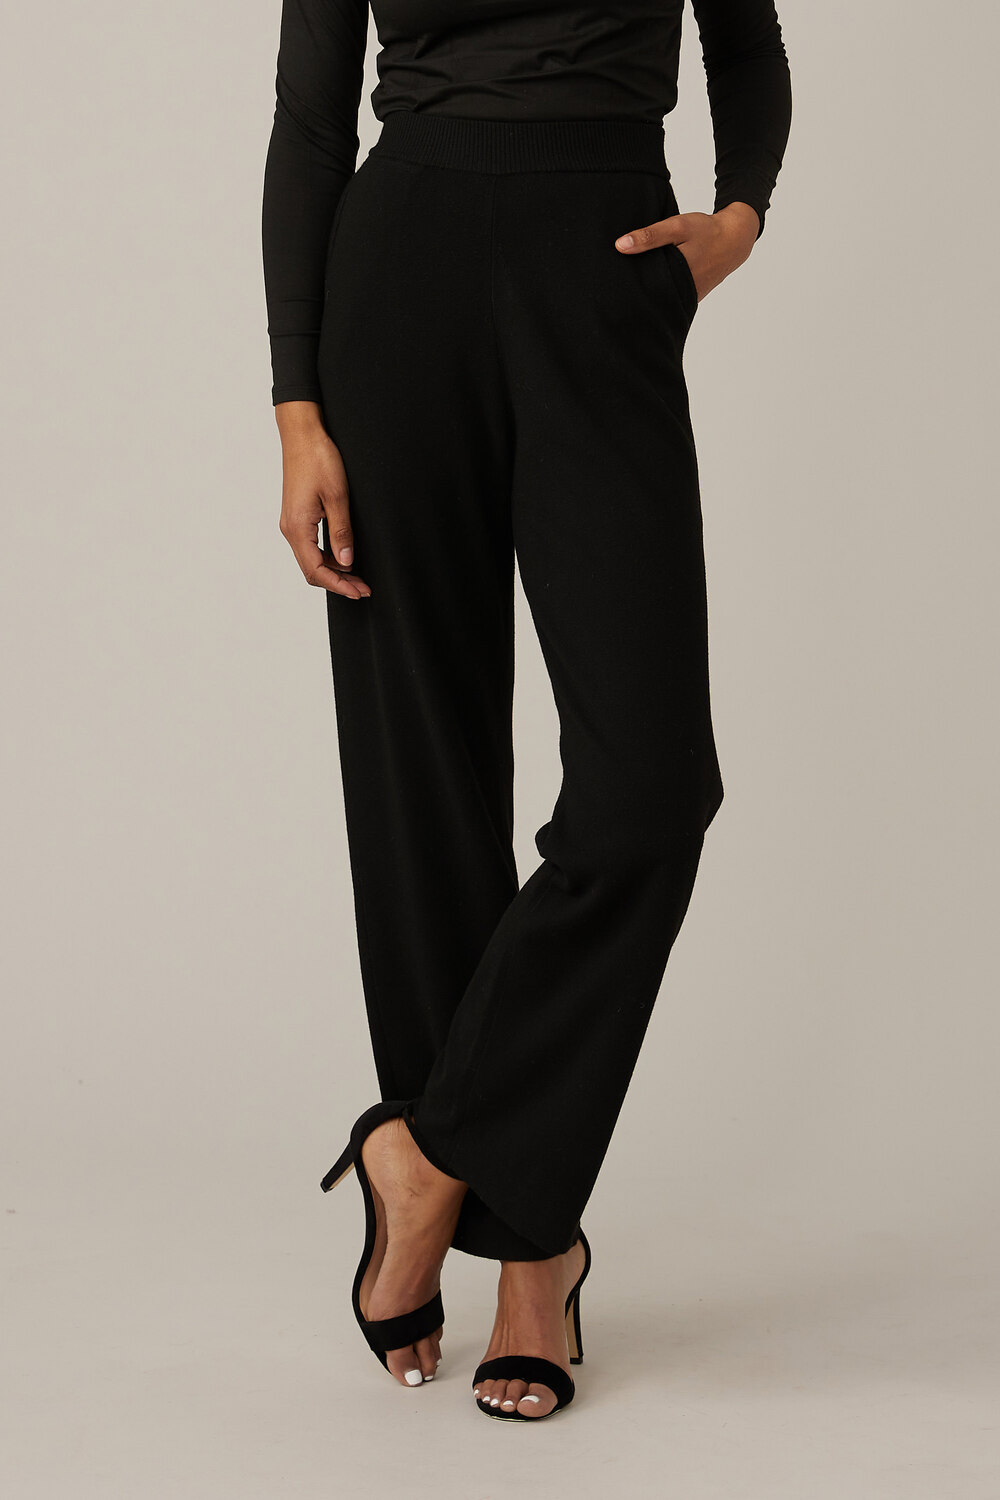 Emproved Knit Wide Leg Pants Style A2230. Black